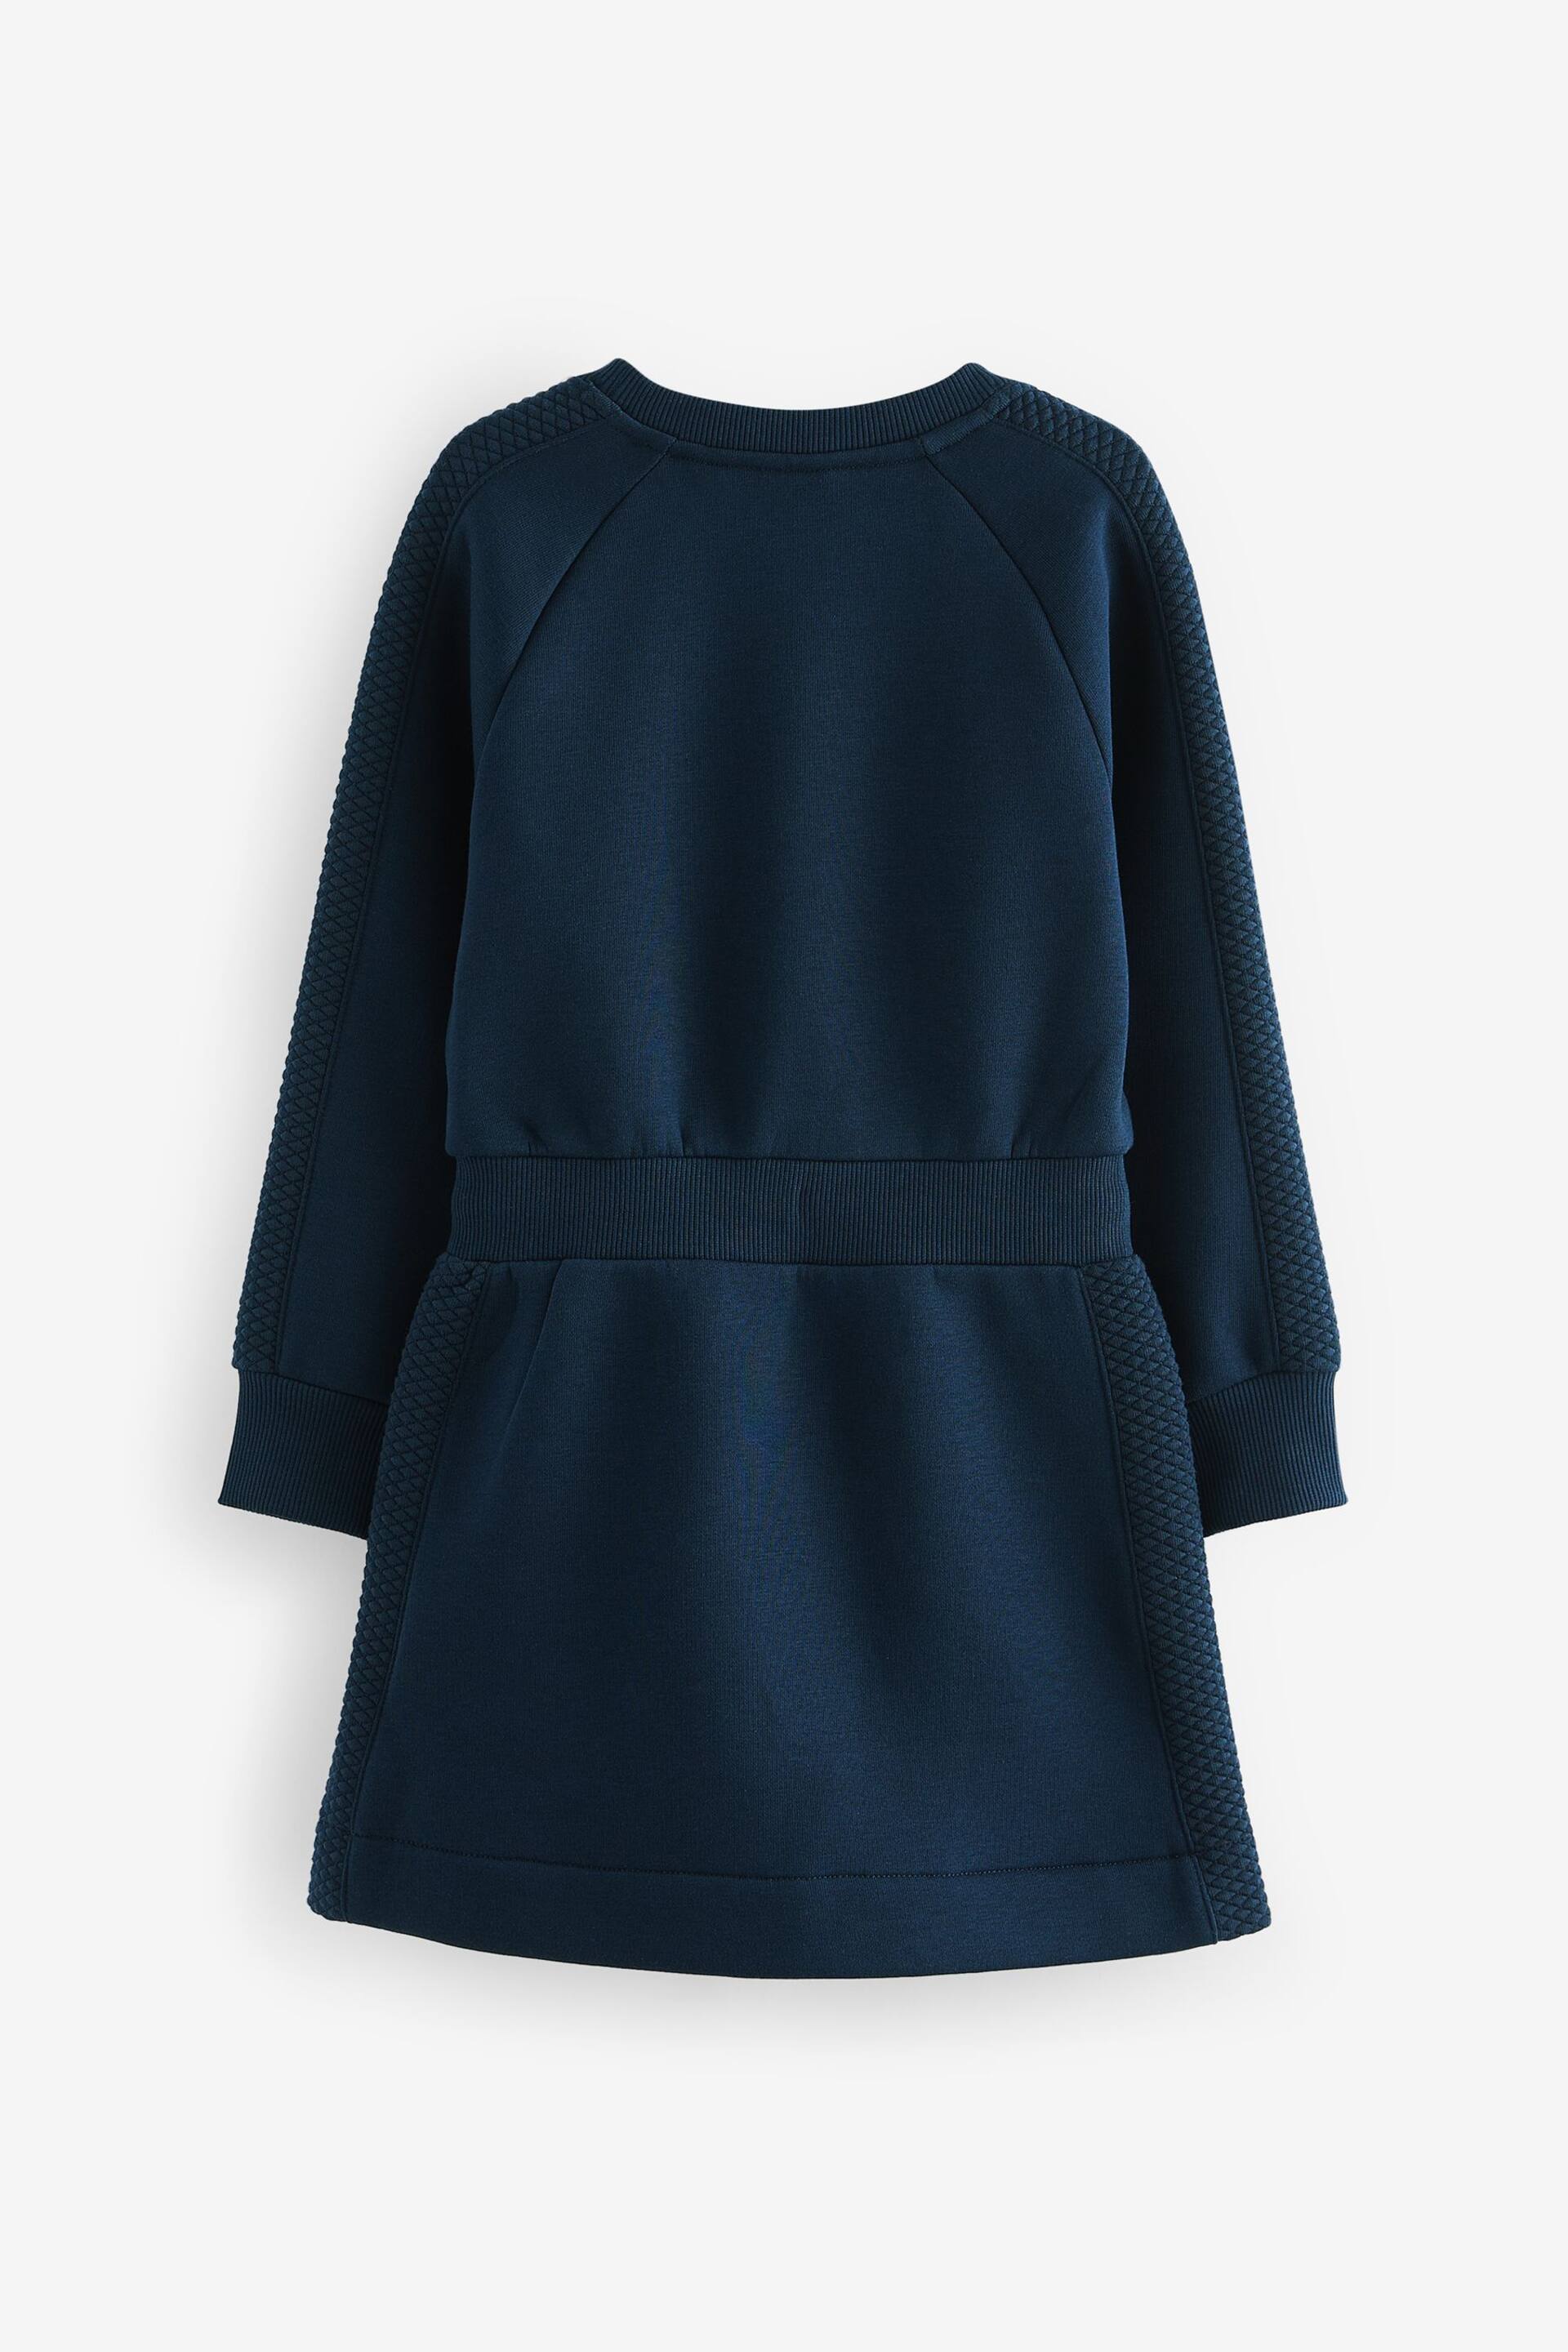 Baker by Ted Baker Quilted Sweat Dress - Image 7 of 10